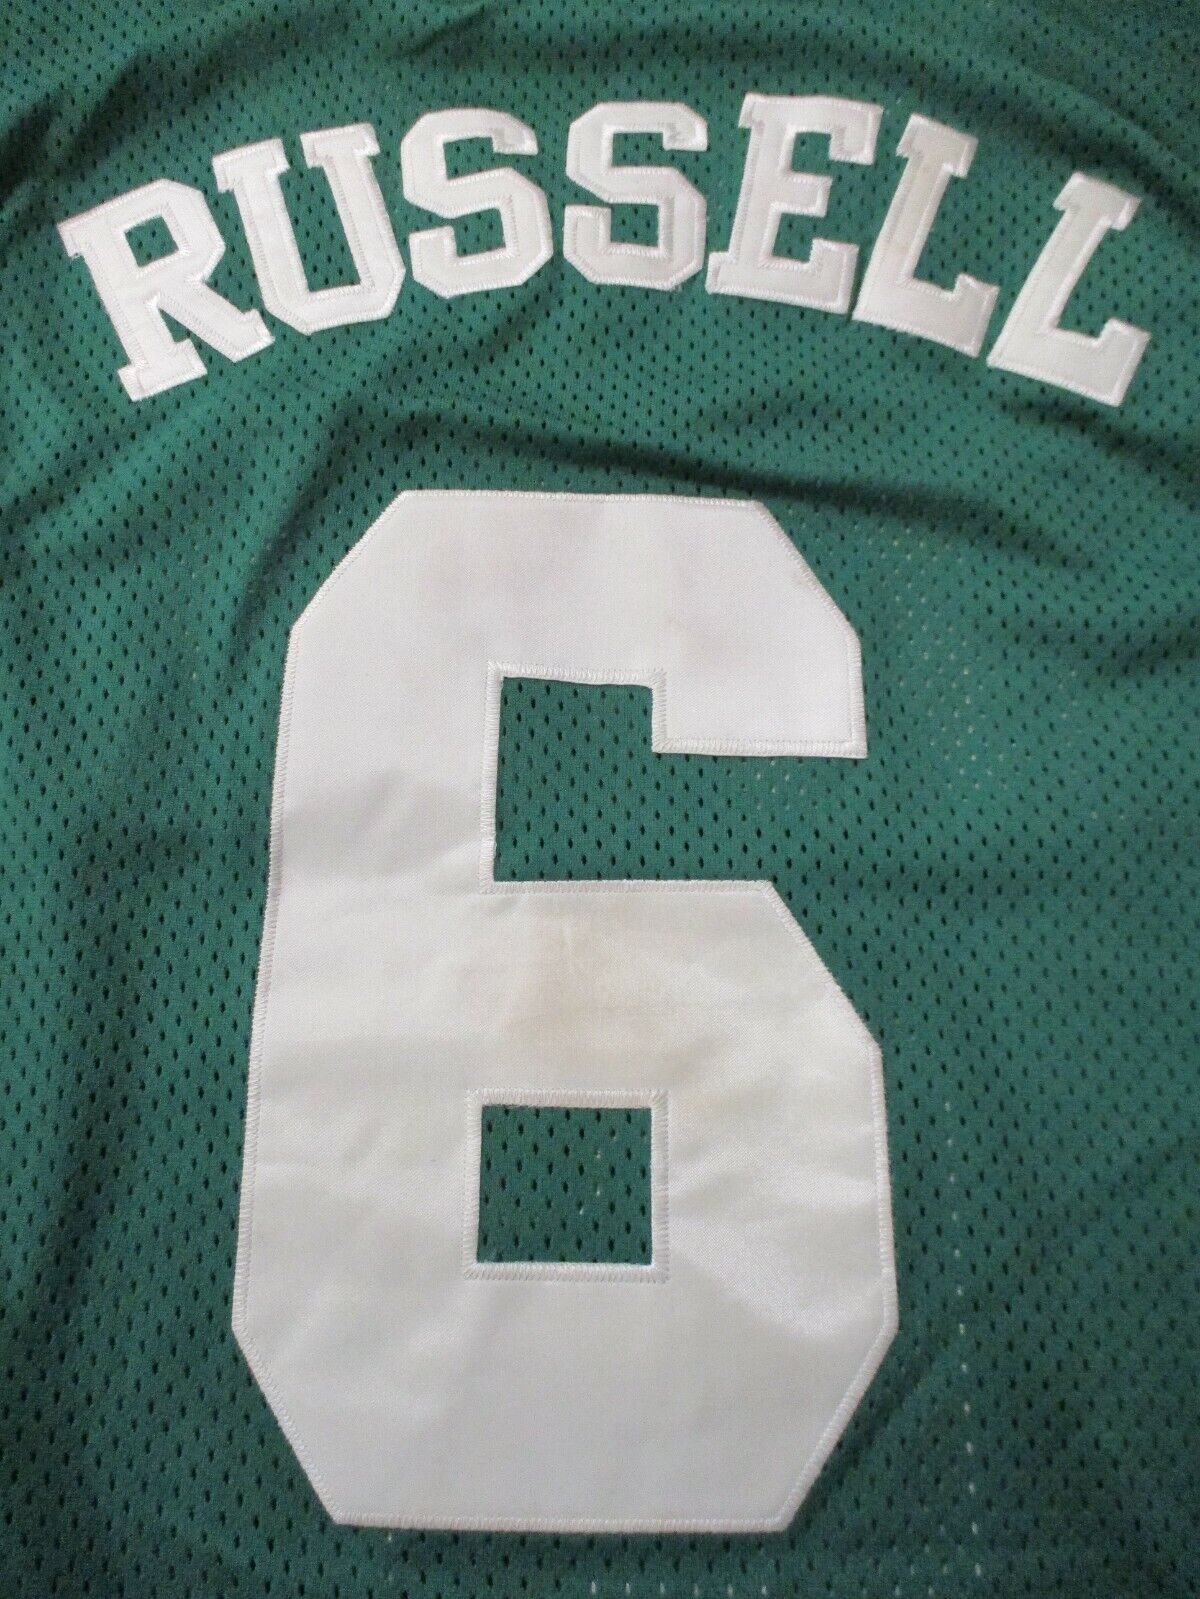 bill russell mitchell and ness jersey